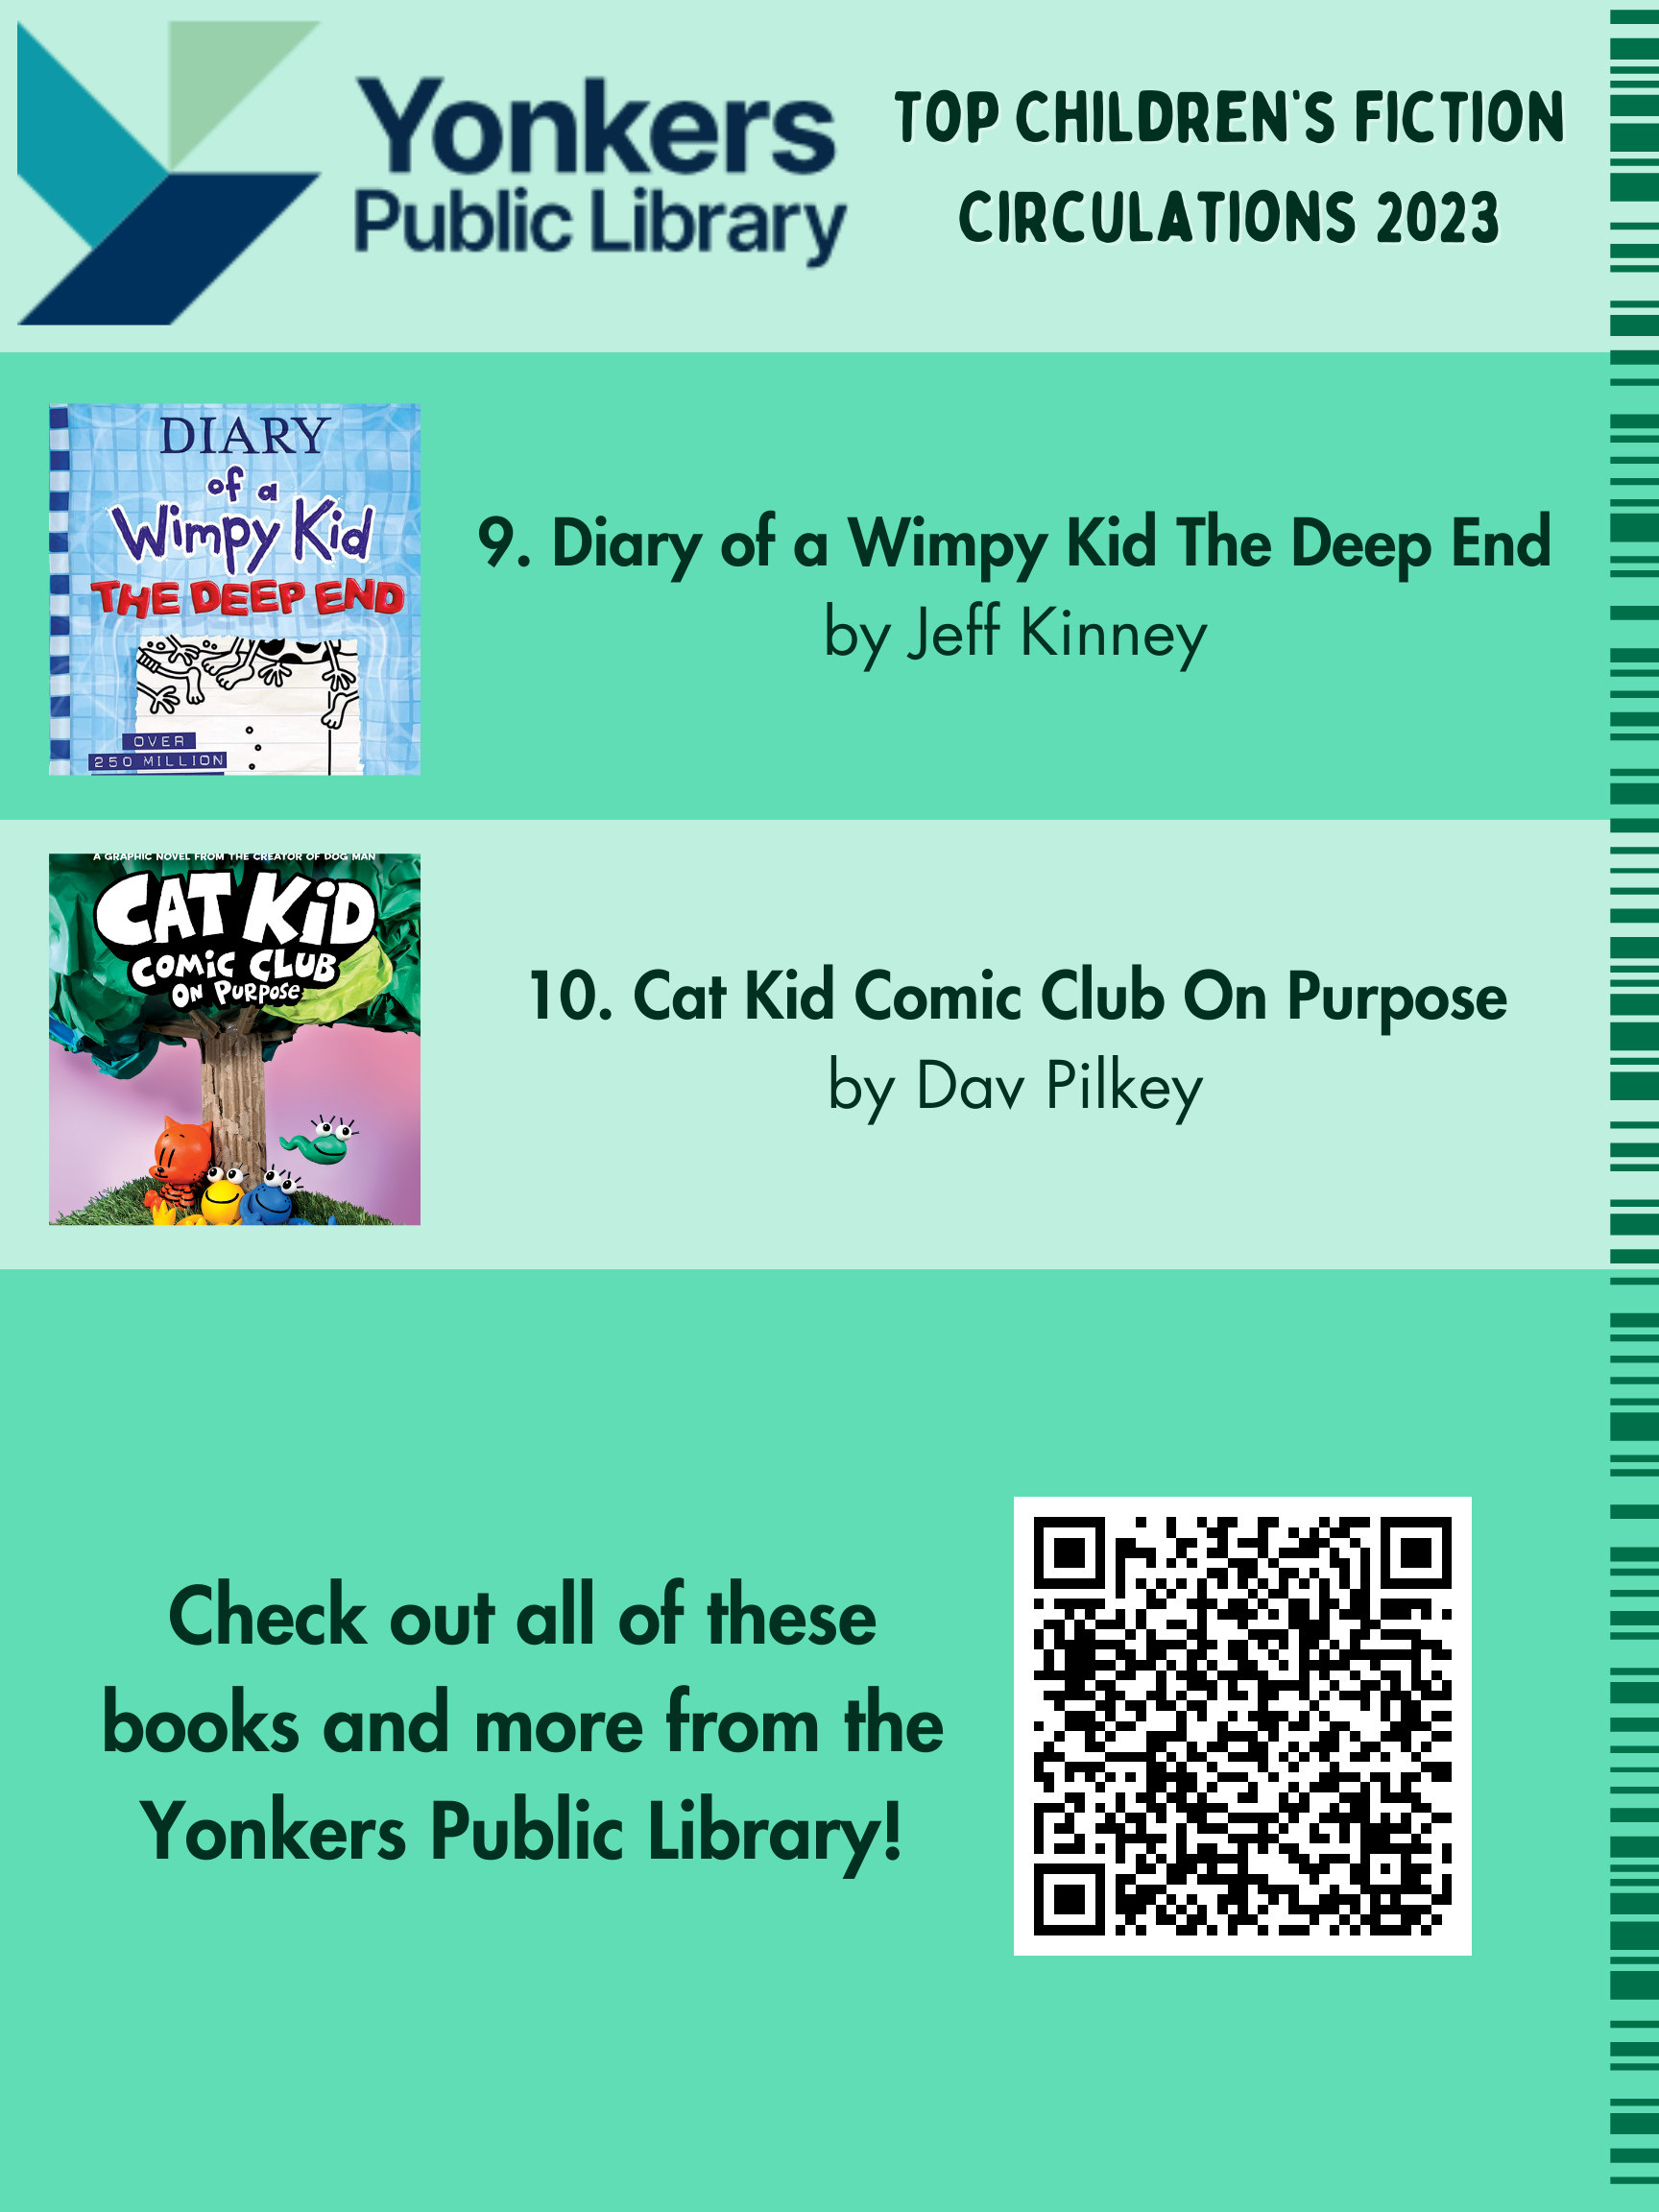 Top Children's Fiction Circulations 2023. Diary of a Wimpy Kid The Deep End and Cat Kid Comic Club On Purpose.